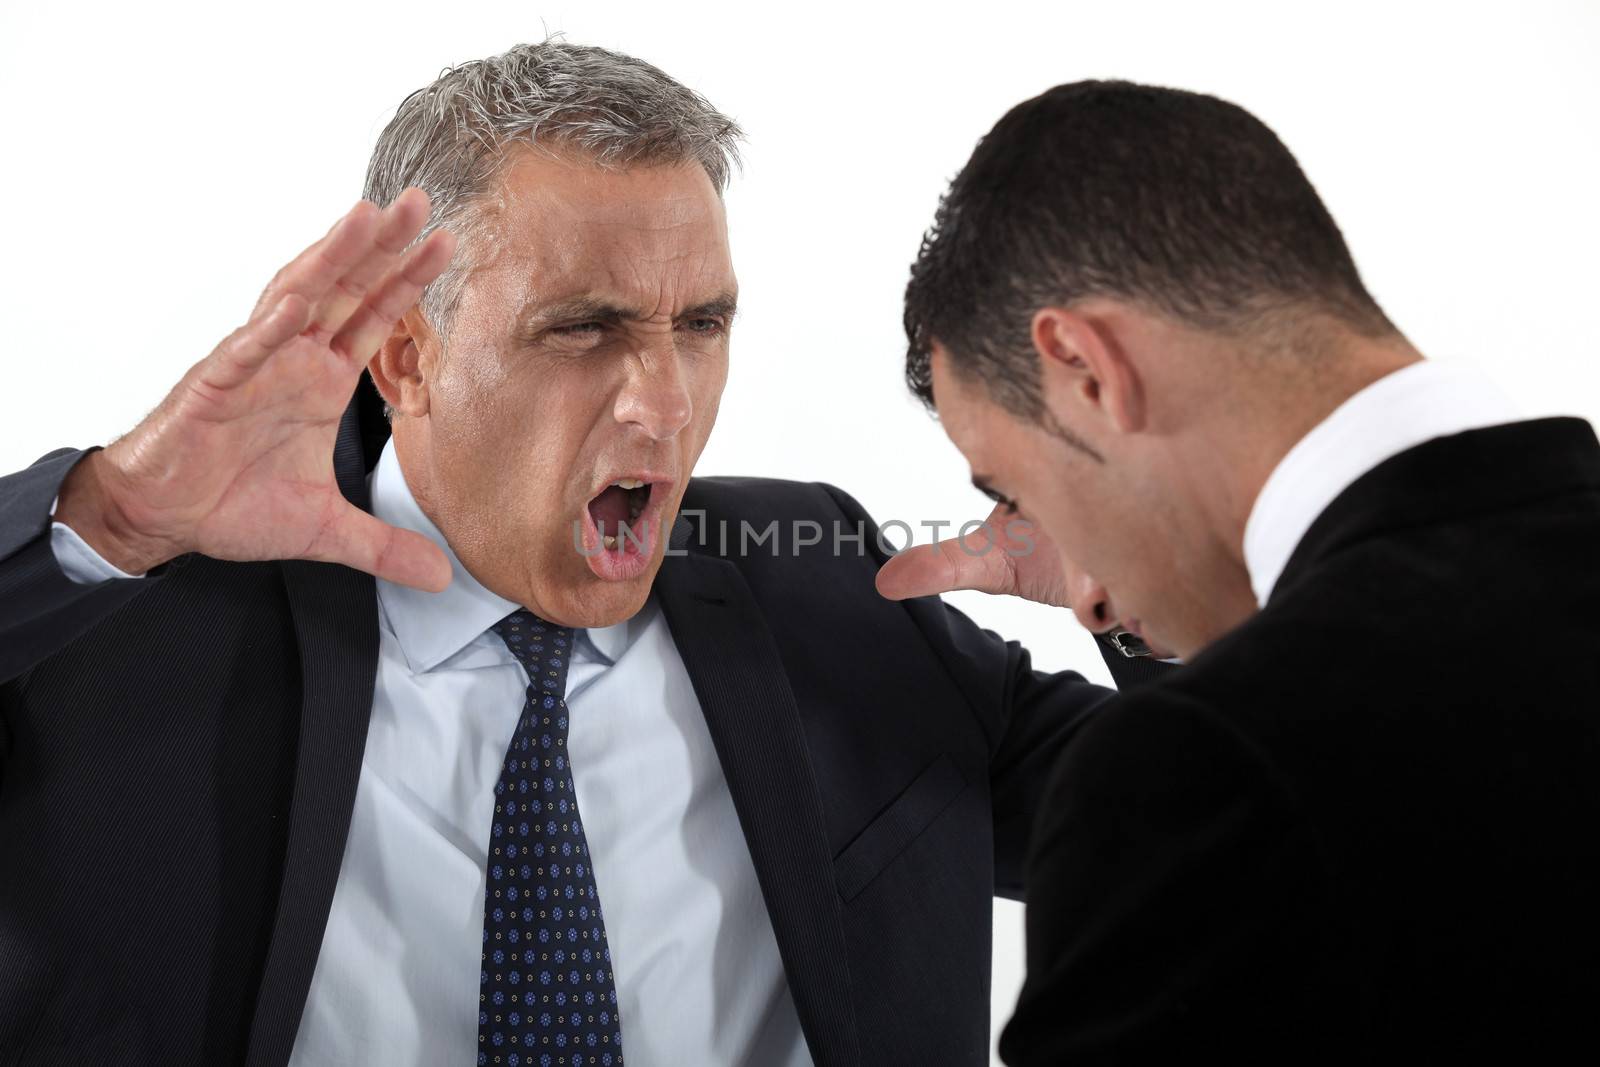 Boss shouting at useless employee by phovoir